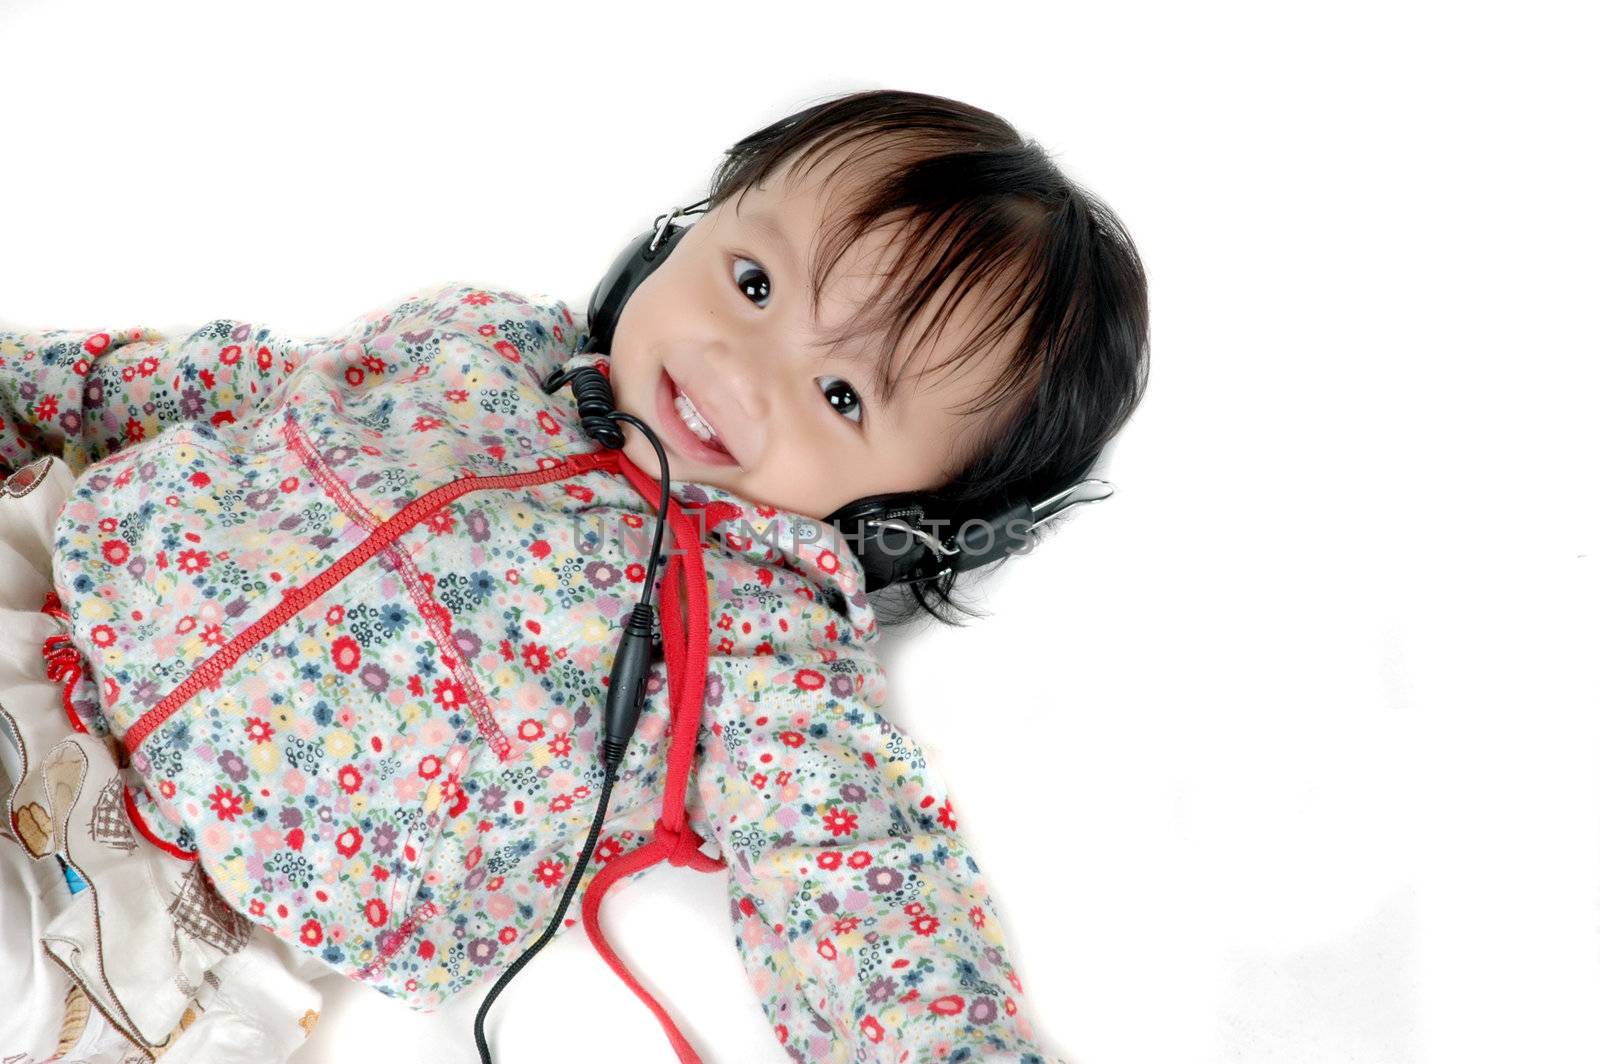 a young Asian girl lying down listening to music with headphones isolated on white background